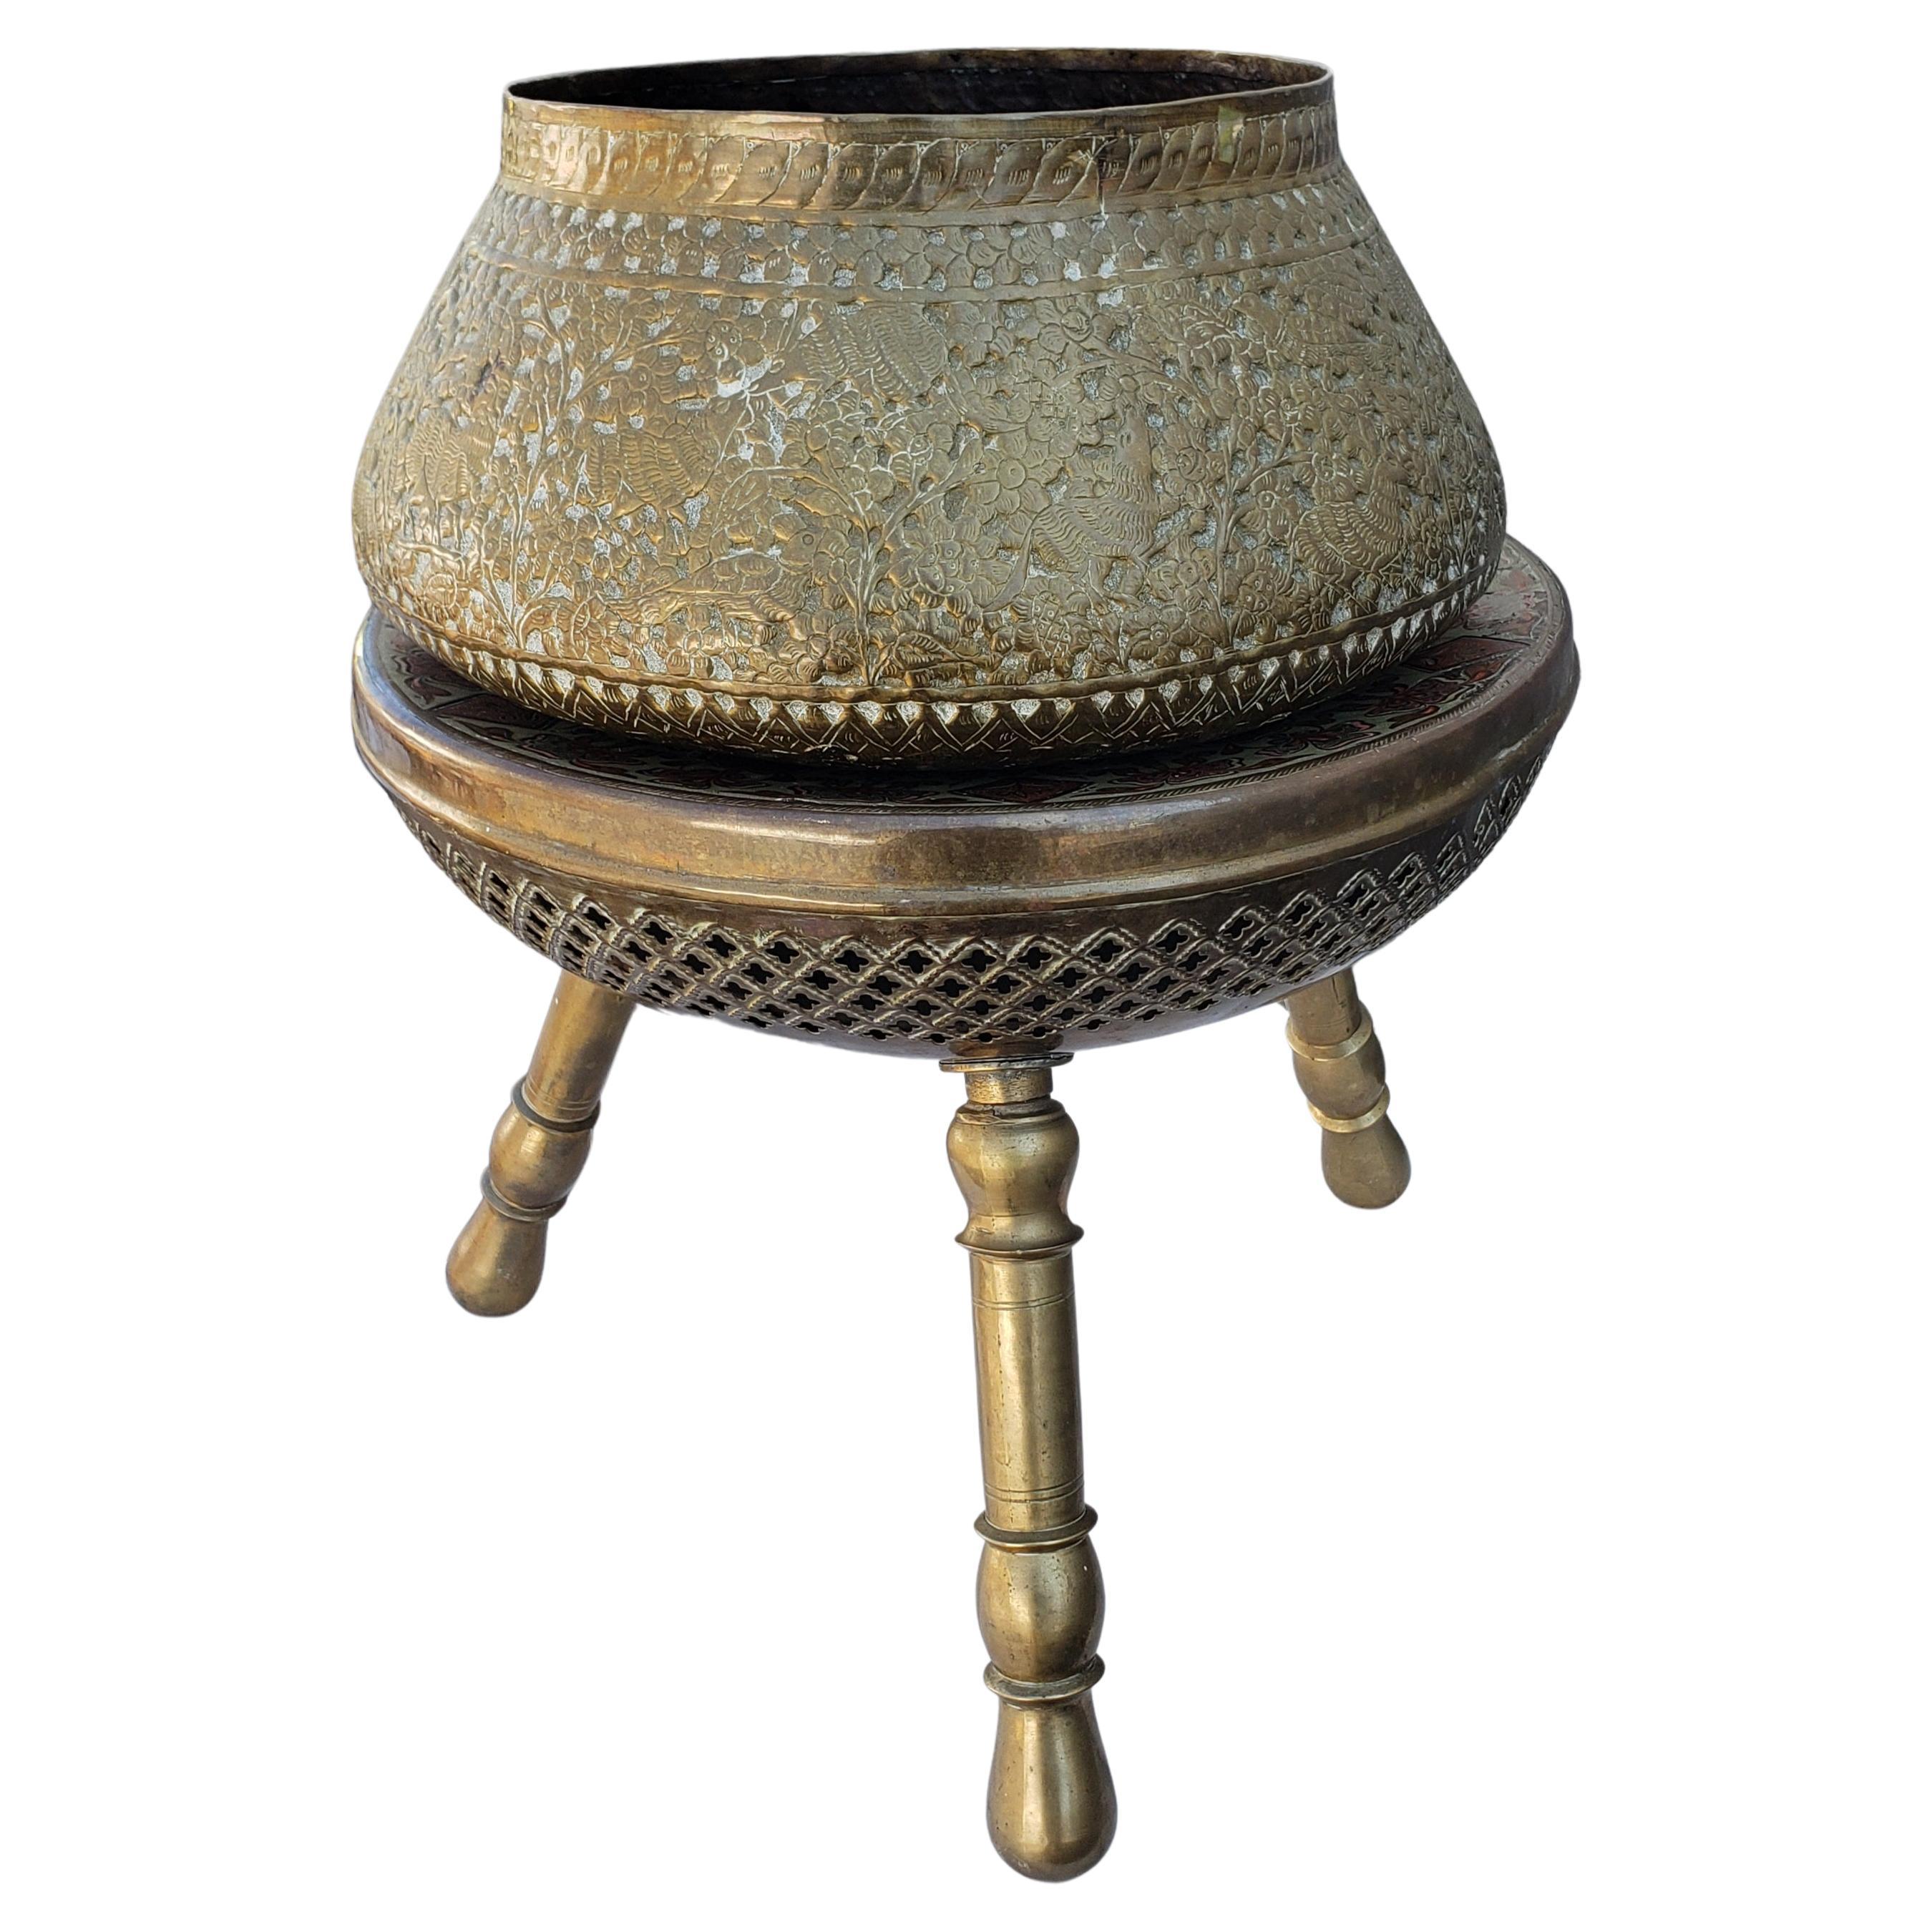 Indian Repoussé & Engraved Brass Bowl / Planter on Engraved Brass Stand / Stool For Sale